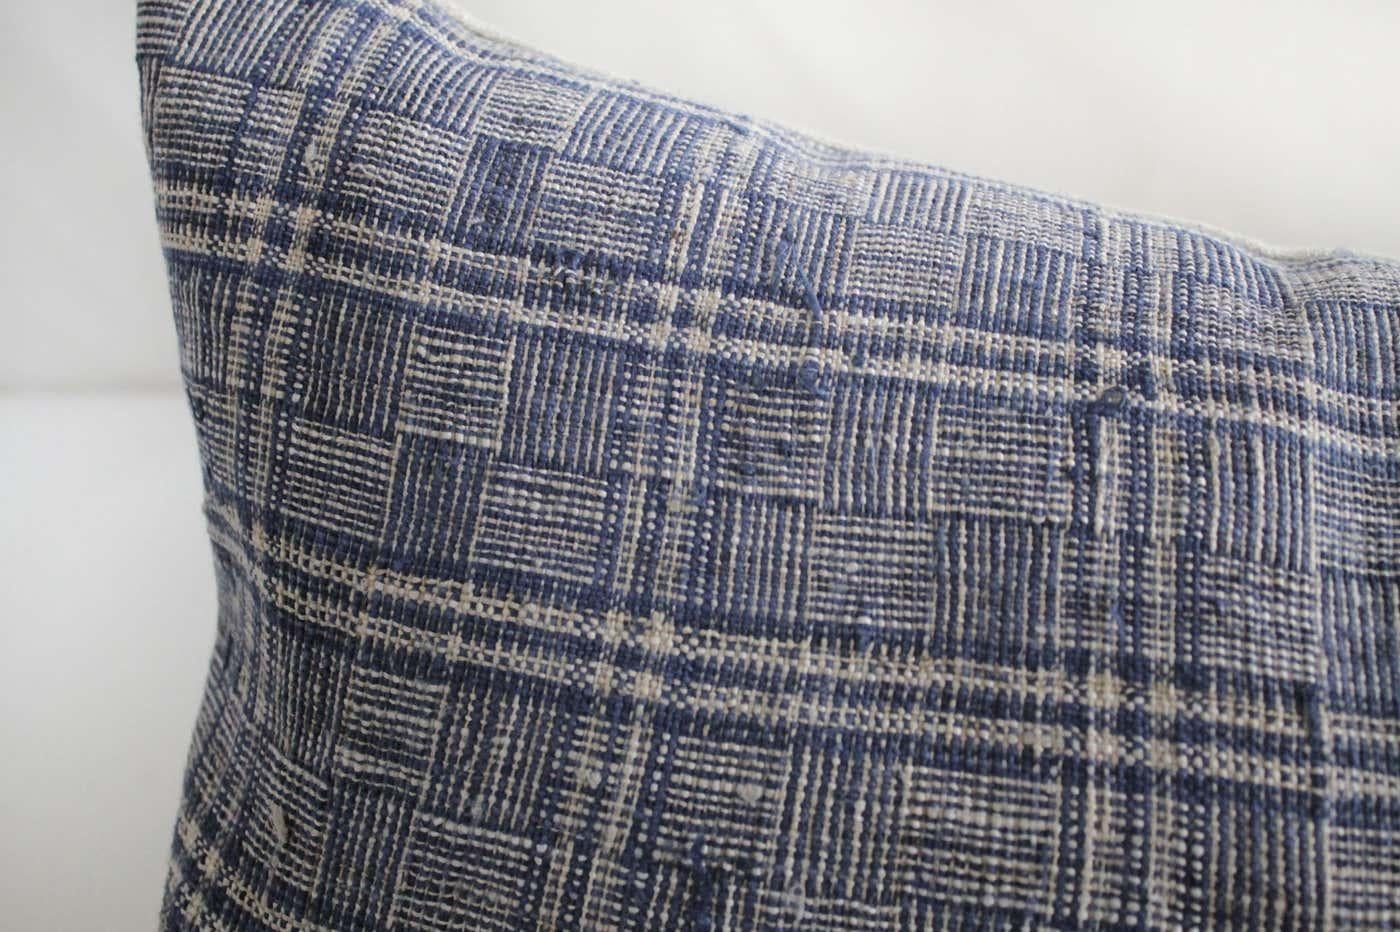 Antique homespun linen lumbar pillows made from a vintage indigo and natural checkered grain sack linen, with a solid natural flax linen backing.
The backing is 100% Irish linen in natural linen. Our pillows are constructed with vintage one of a